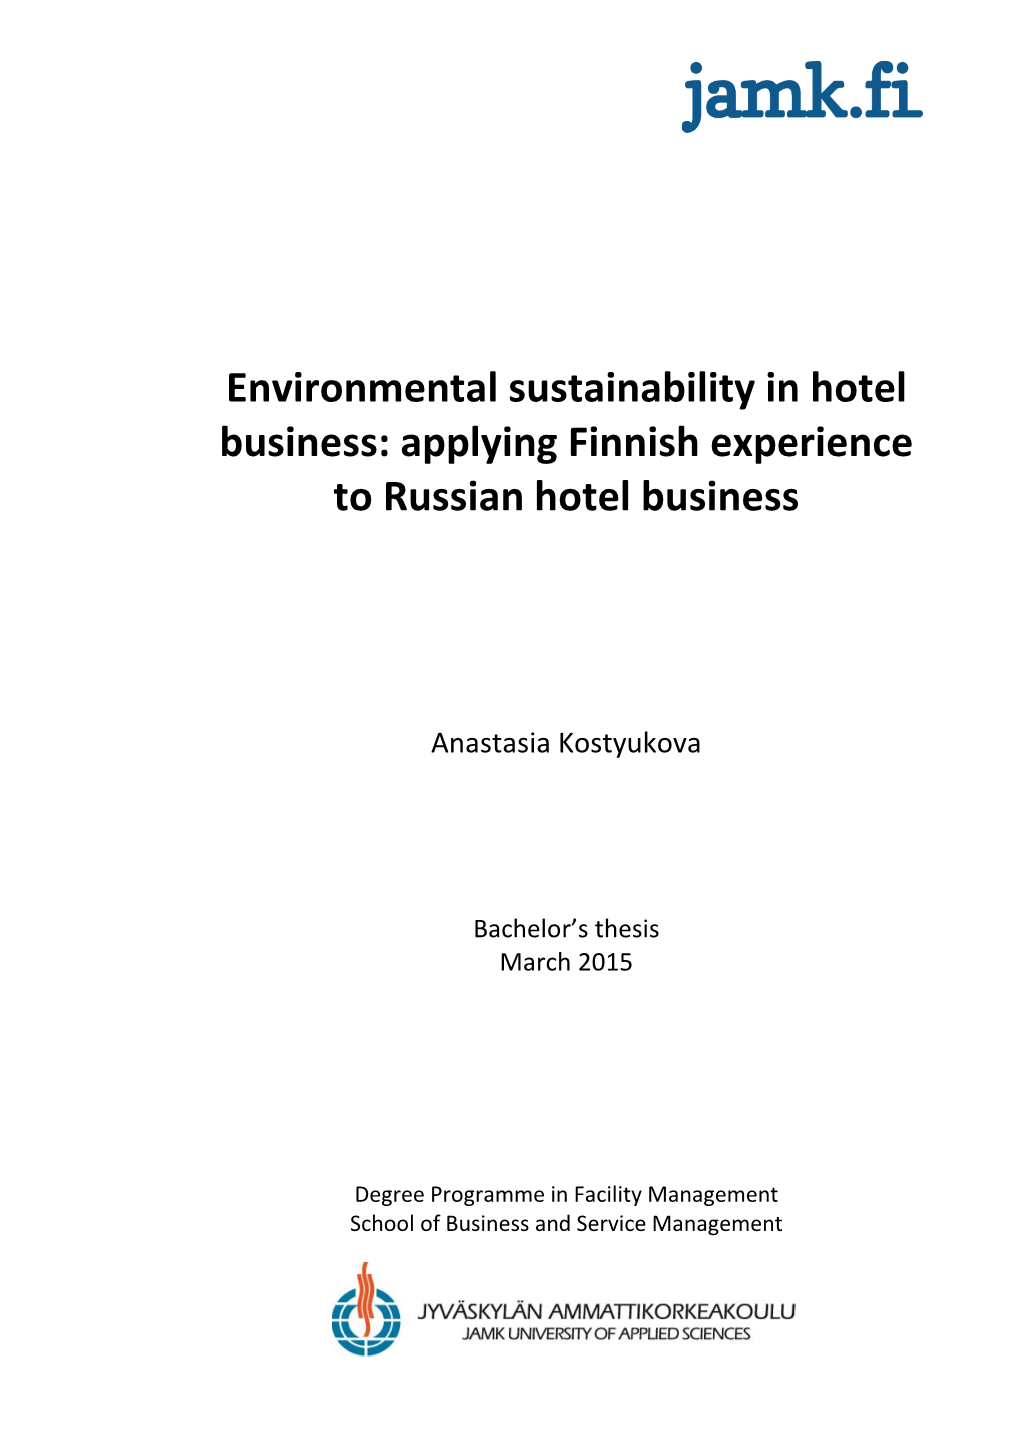 Environmental Sustainability in Hotel Business: Applying Finnish Experience to Russian Hotel Business